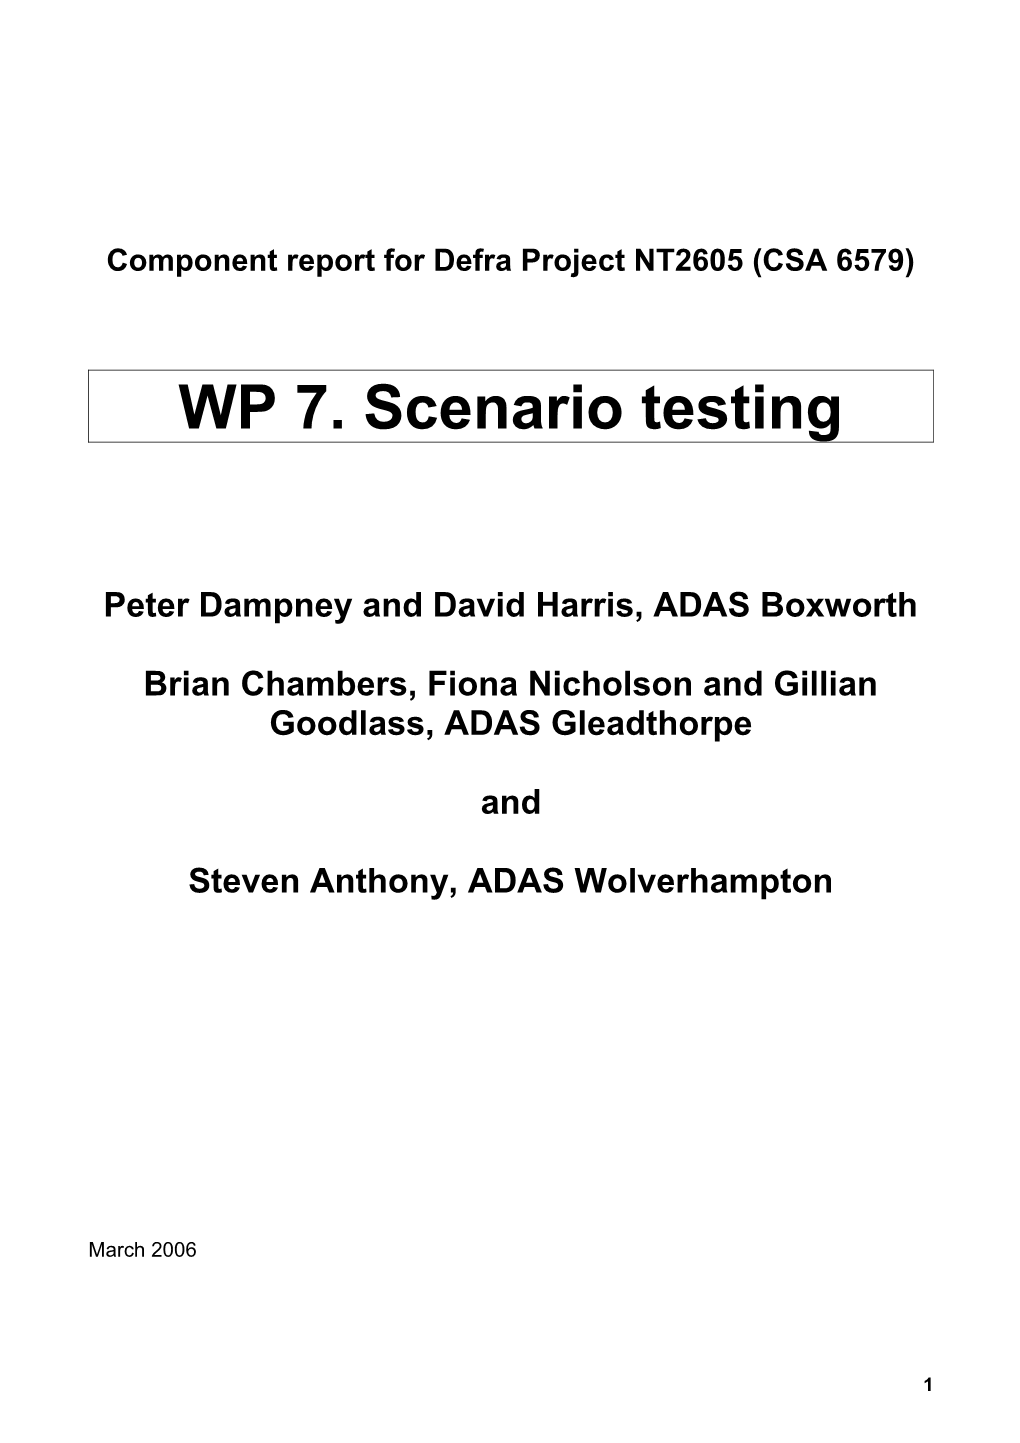 Report for Defra Project NT2601